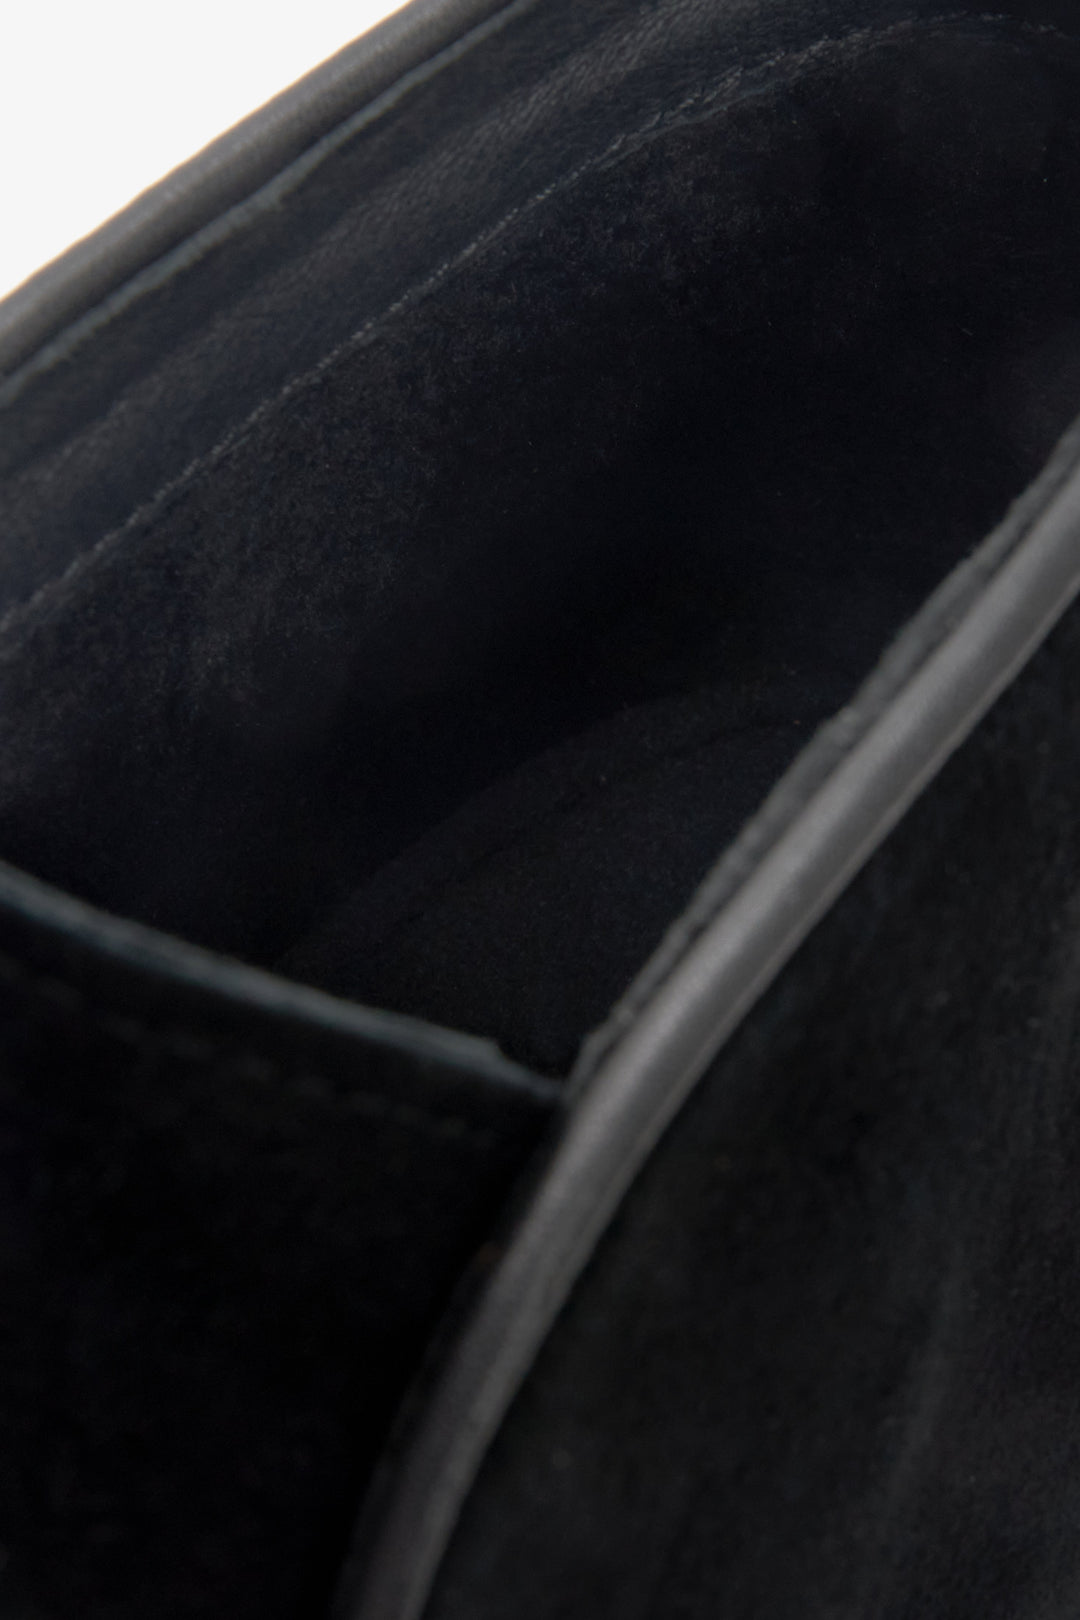 Soft black velour men's boots for fall by Estro - close-up on the interior details of the model.